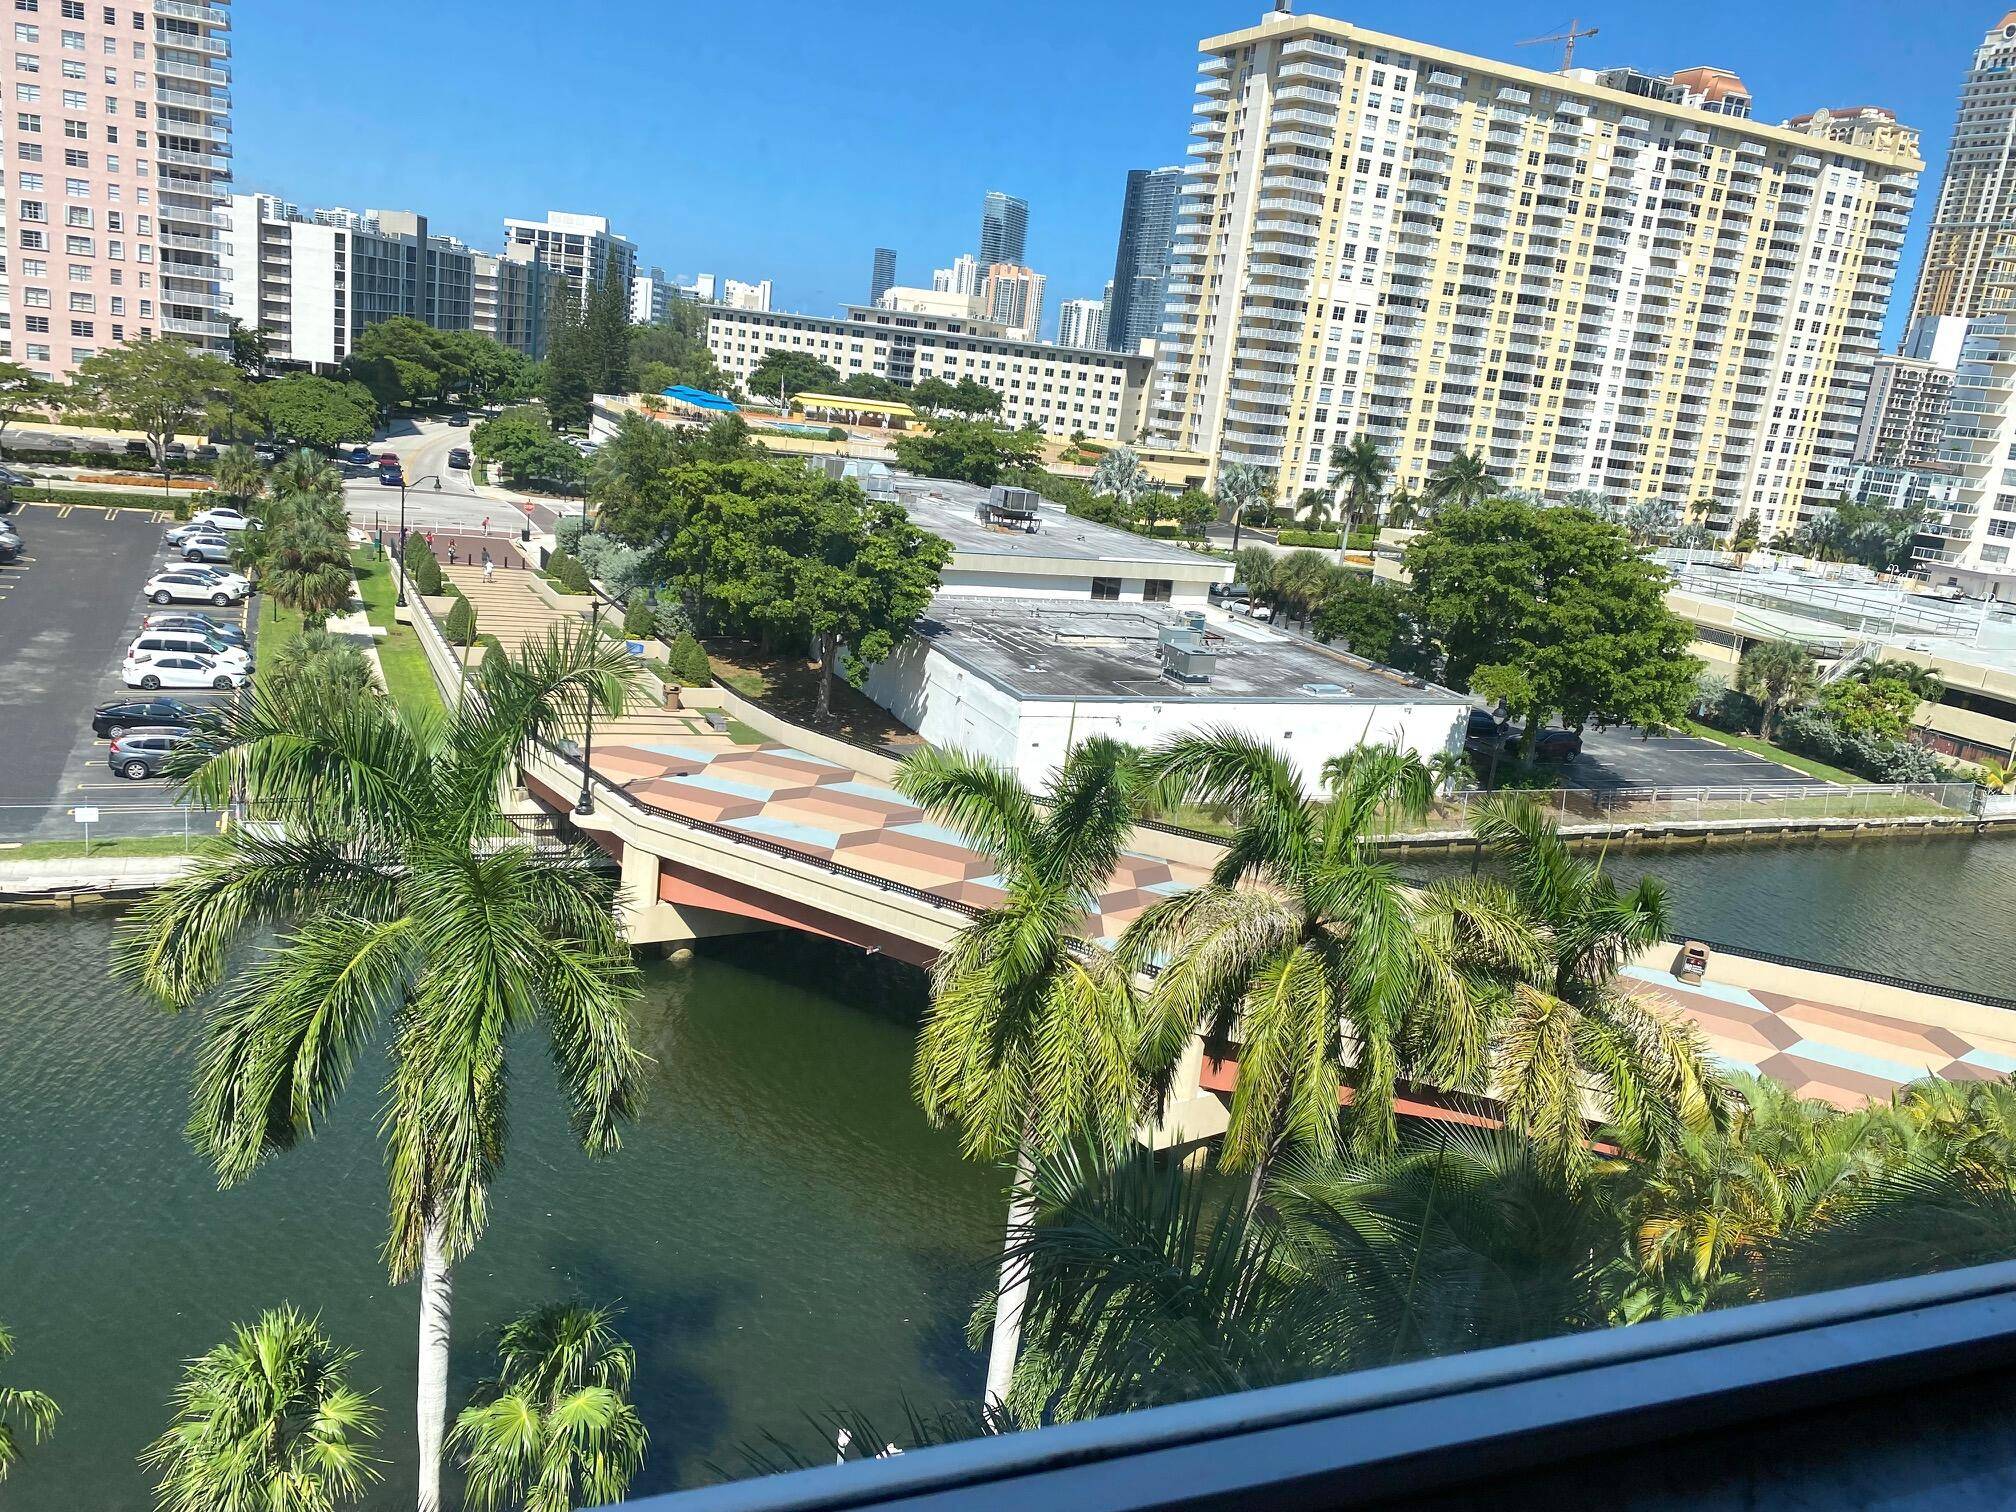 CONDO FOR RENT IN PORTO BELLAGIO, SUNNY ISLES BEACH AMAZING LOCATION WALK TO THE BEACH, EXCELENT RESTAURANTS SHOPPING CENTERS, AND THE FABULOUS LIFESTYLE, ON THESE 2 BEDROOMS, 2 BATHS, WITH ...